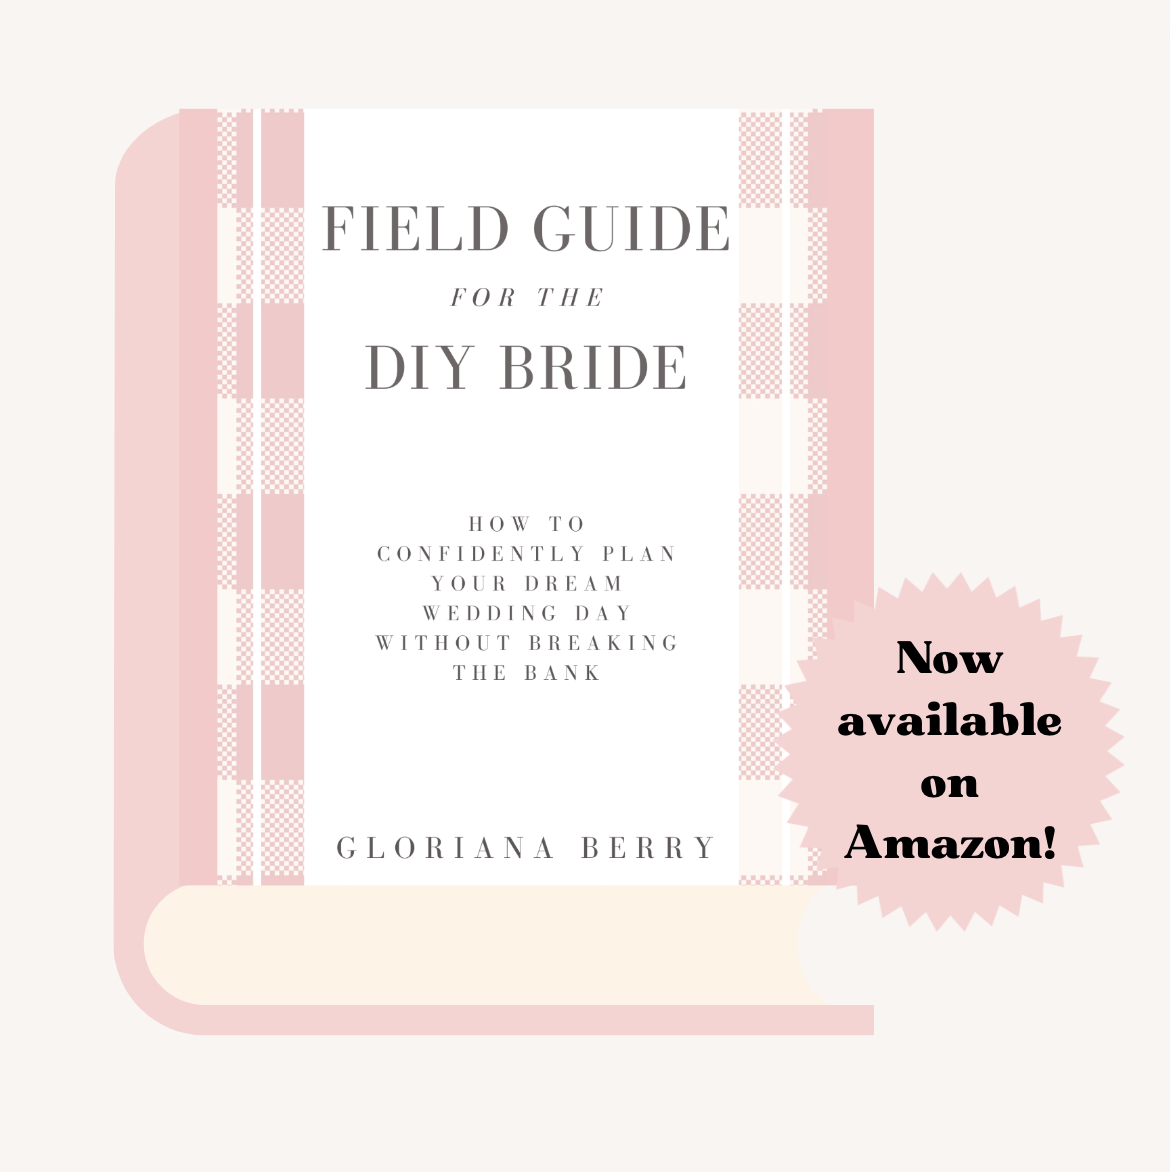 Field Guide for the DIY Bride